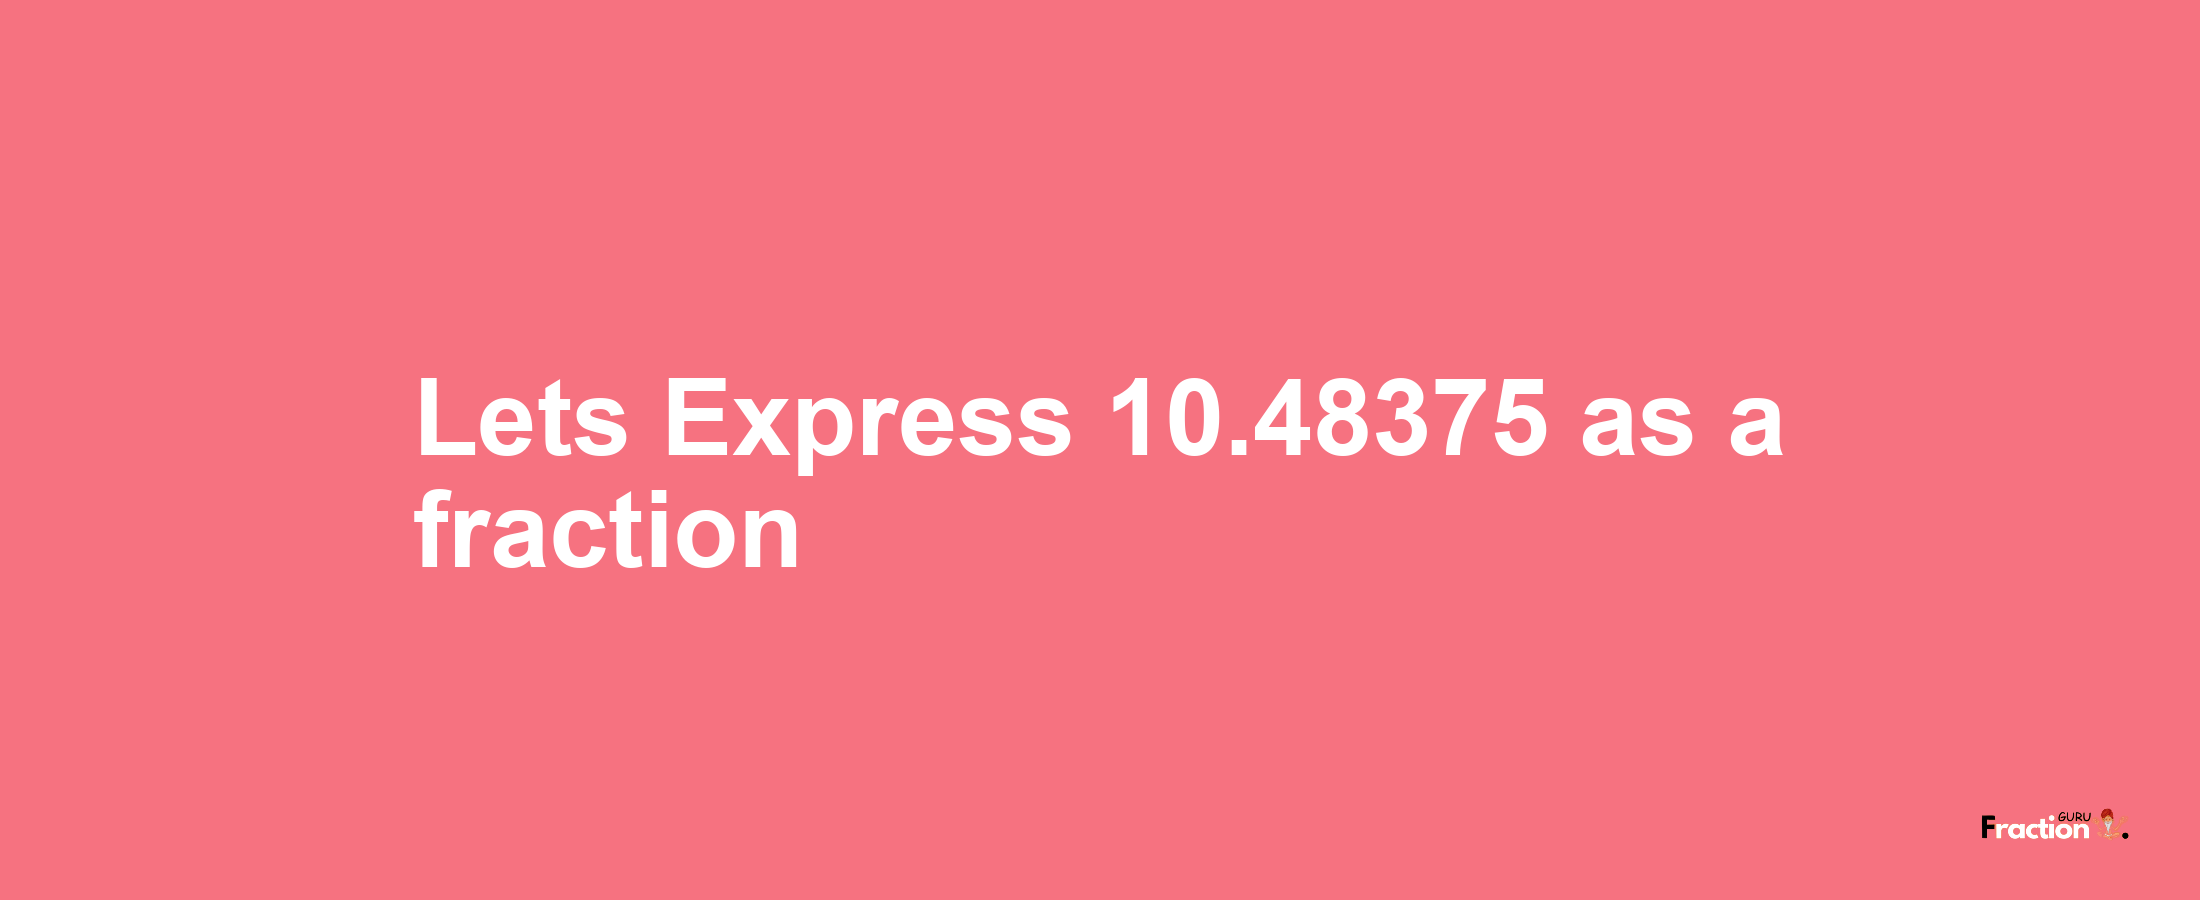 Lets Express 10.48375 as afraction